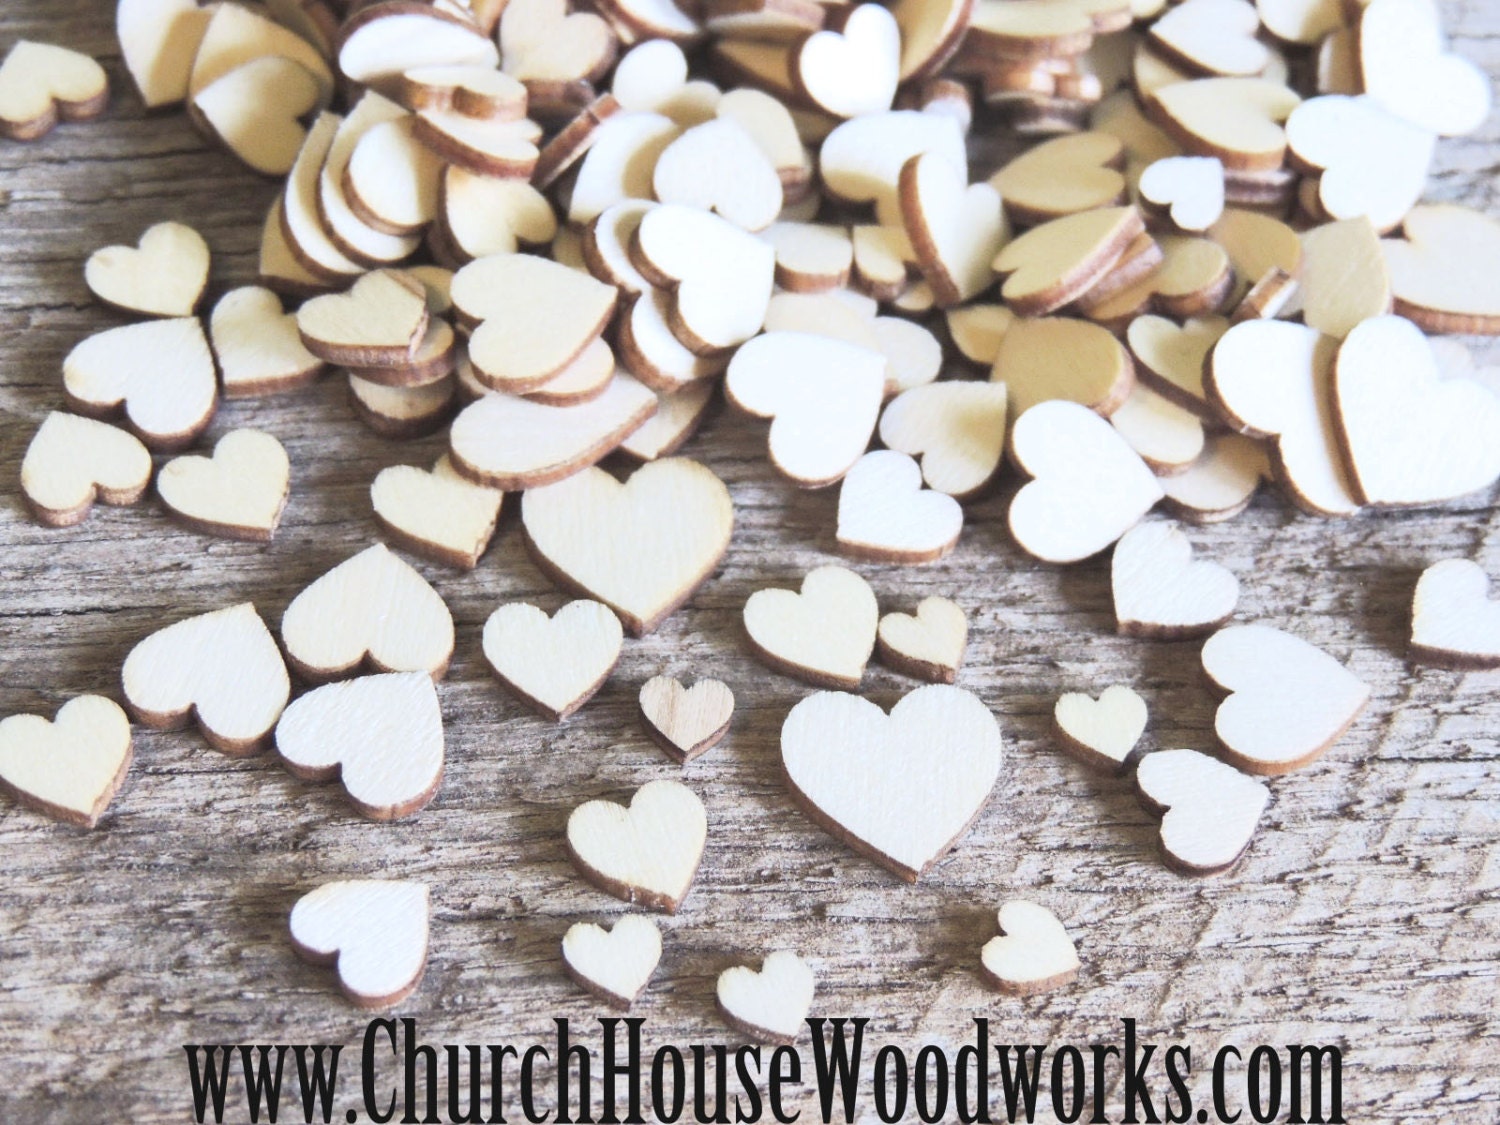 Wooden Hearts for Crafts - for Guest Book - Small Wooden Hearts - Wood Tokens - Cutout Hearts - Wood Hearts for Crafts 50 Pieces (Rustic Hearts)